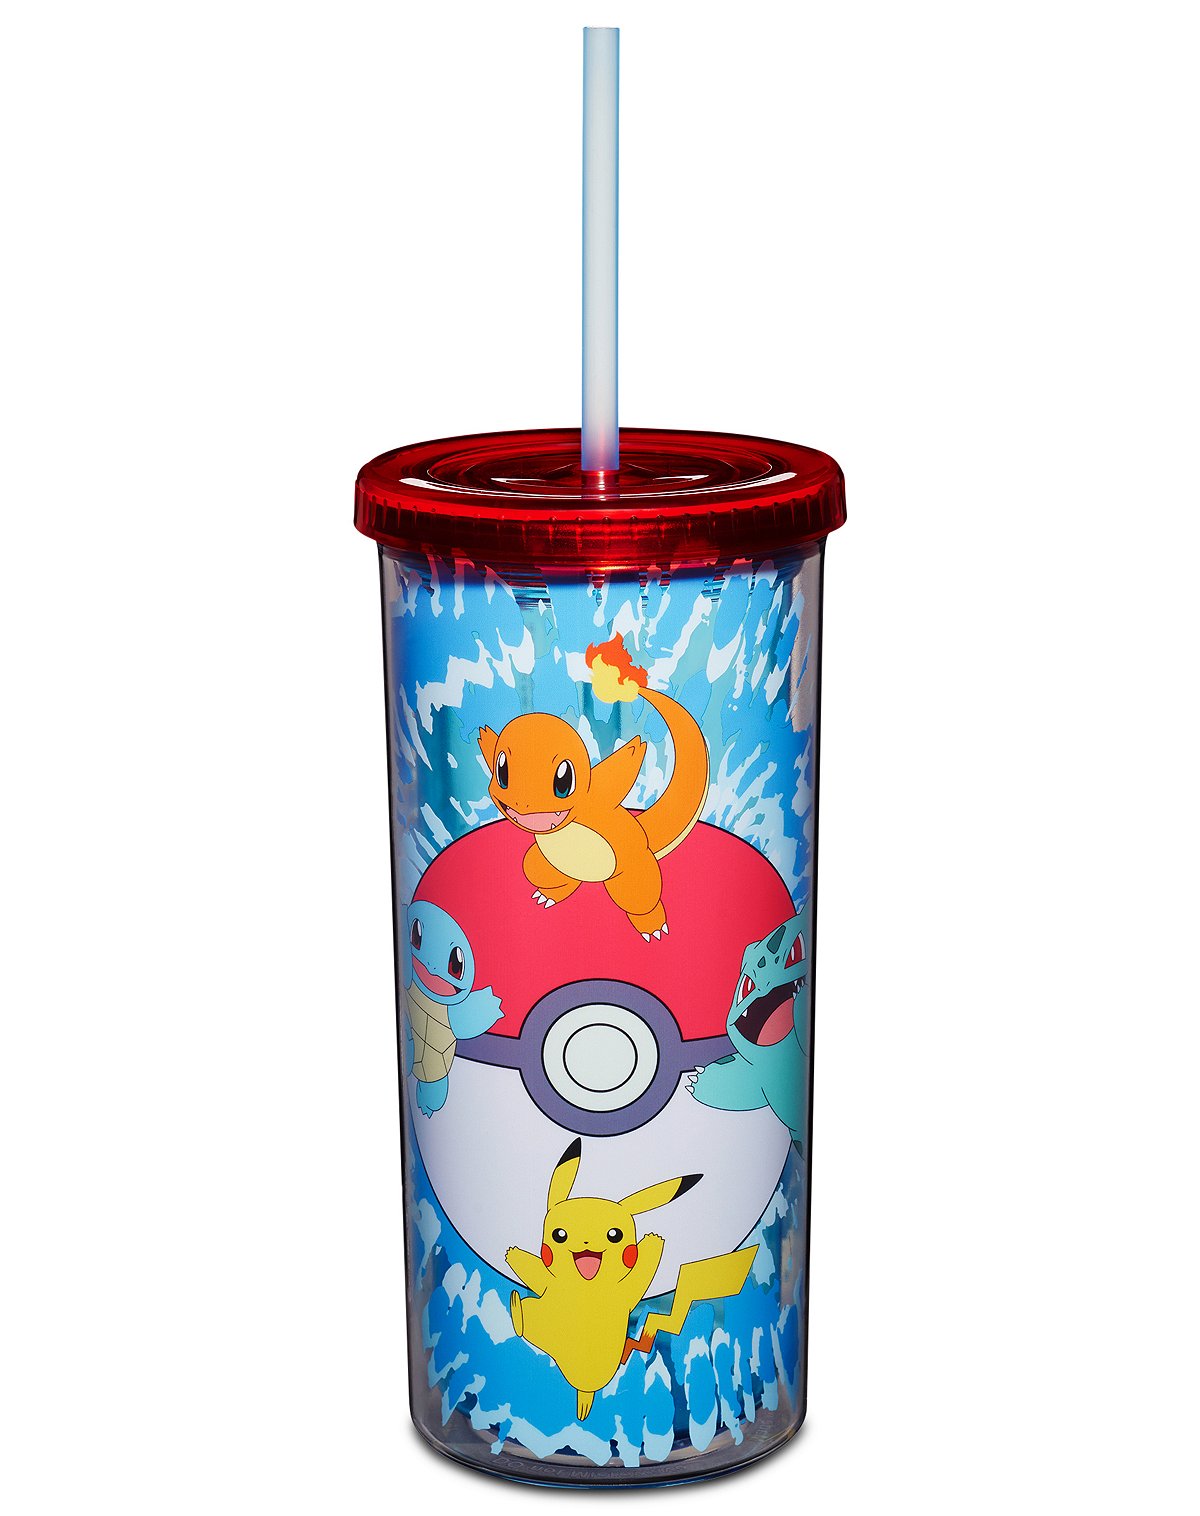 Pokémon Characters Cup with Straw - 20 oz.